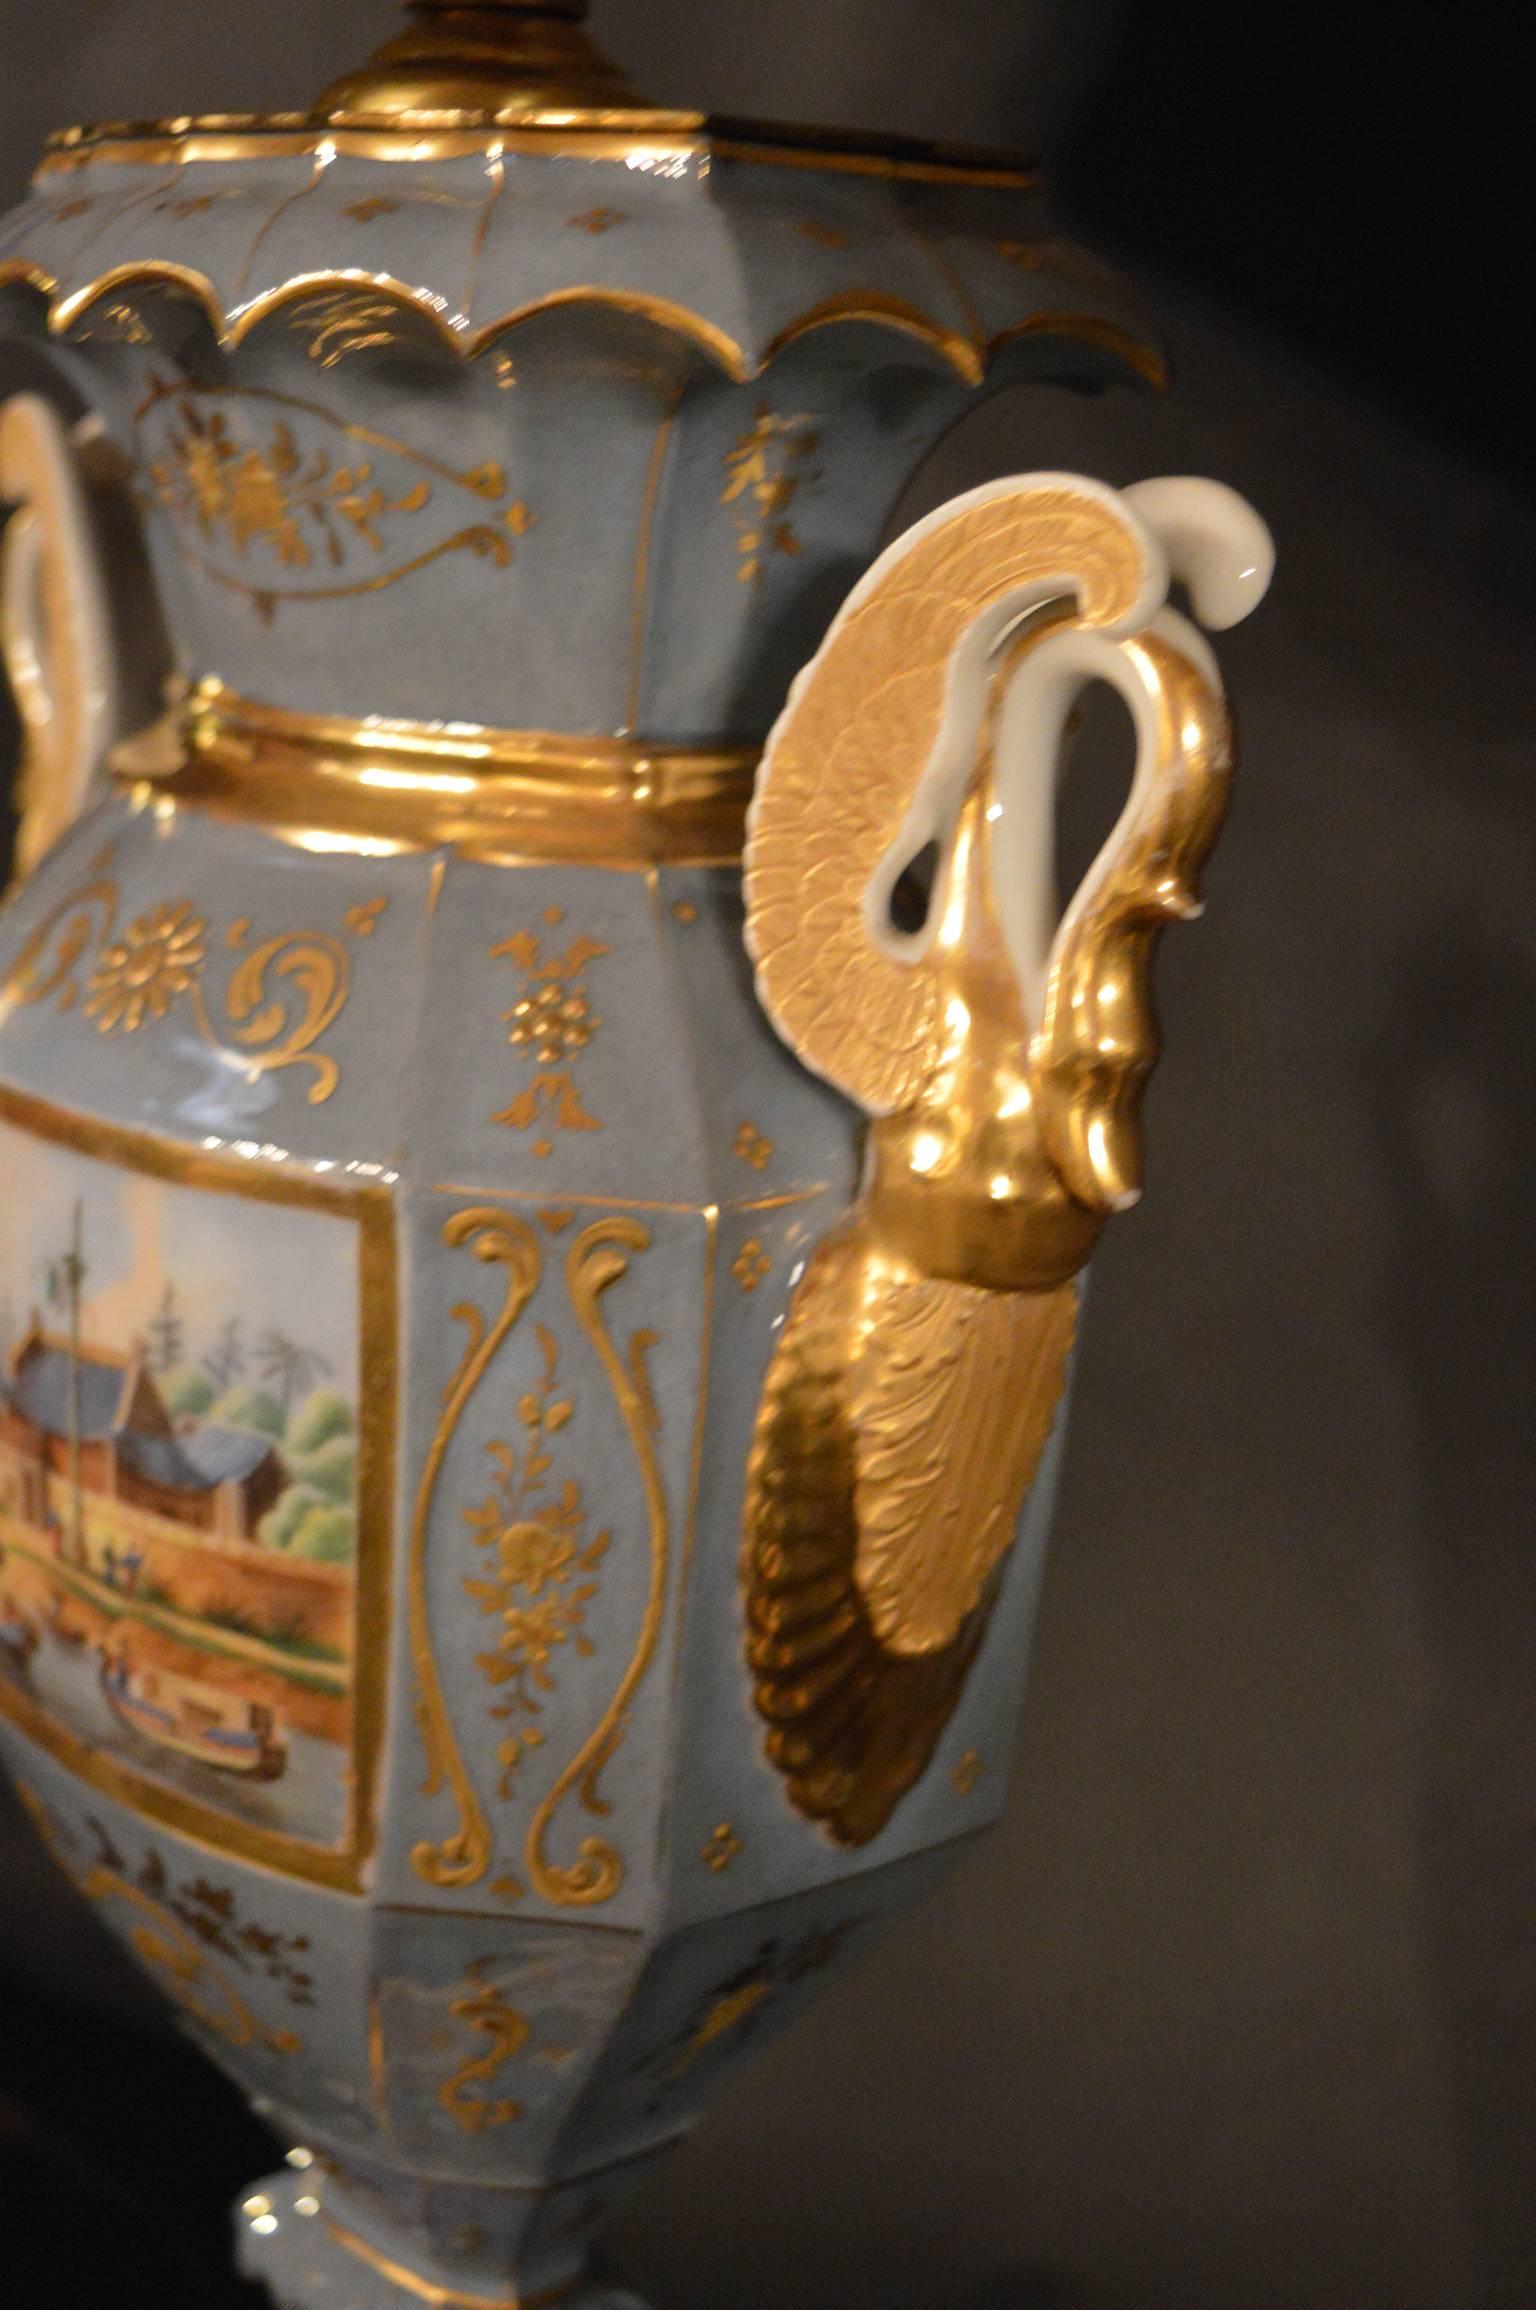 Pair of Italian porcelain lamps, with details of an Asian market hand-painted on the front, back and base.